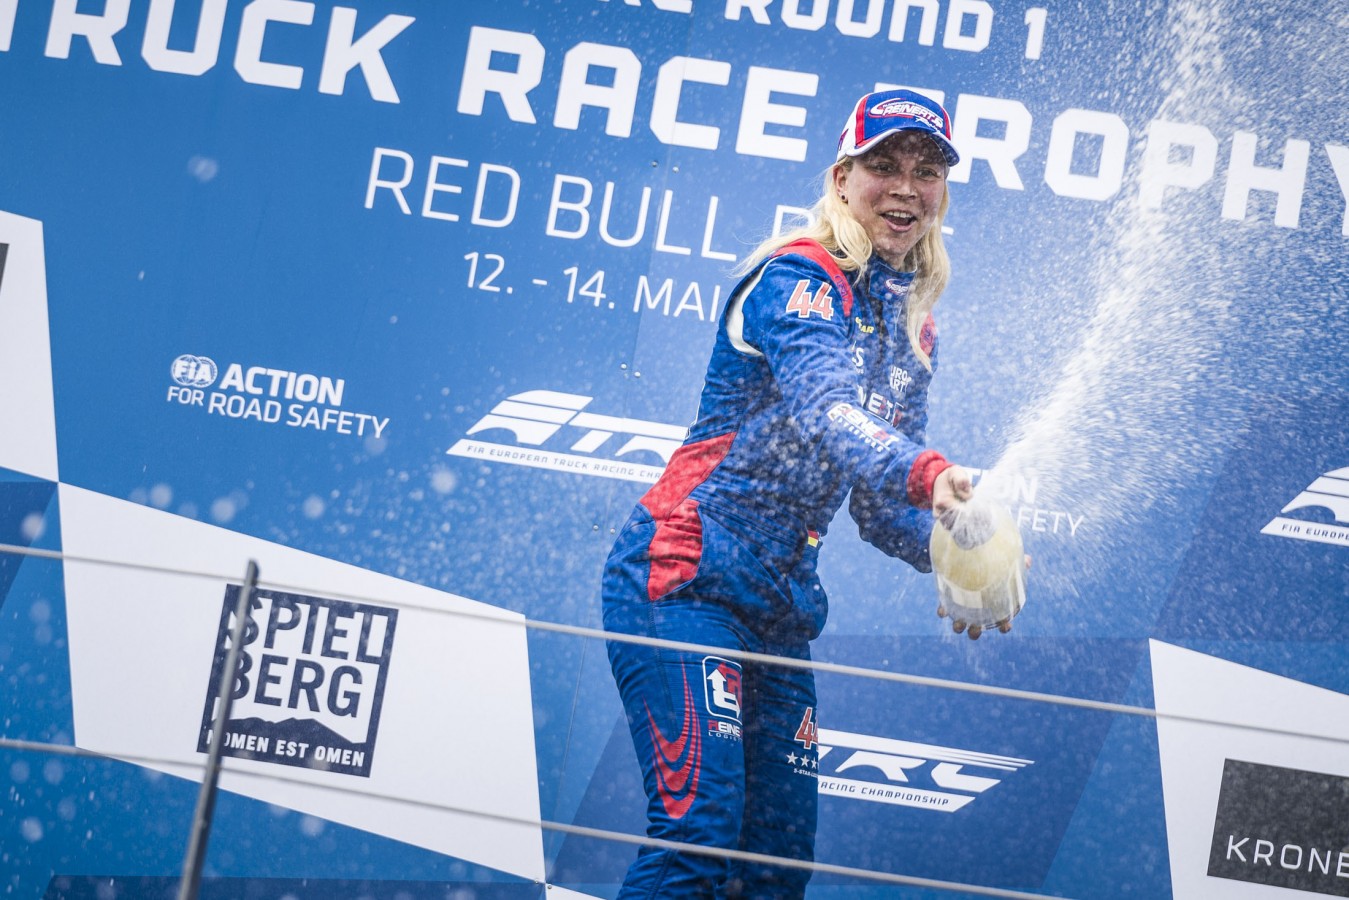 Truck Race Trophy 2017 Stephanie Halm Philip Platzer Red Bull Content Pool